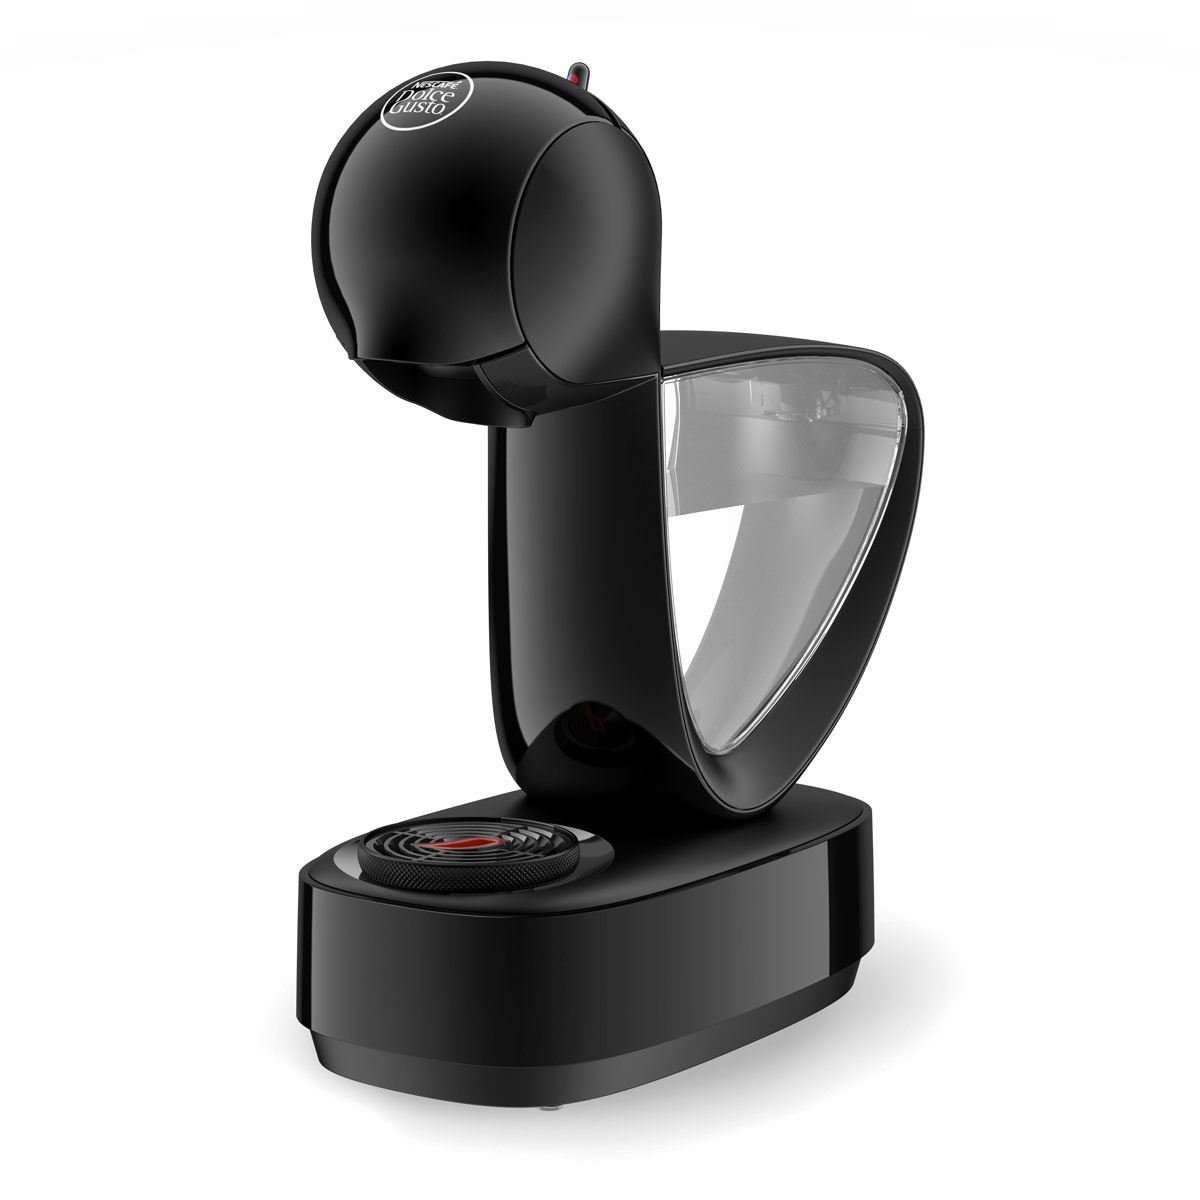 Cafetera Dolce Gusto Infinissima negra